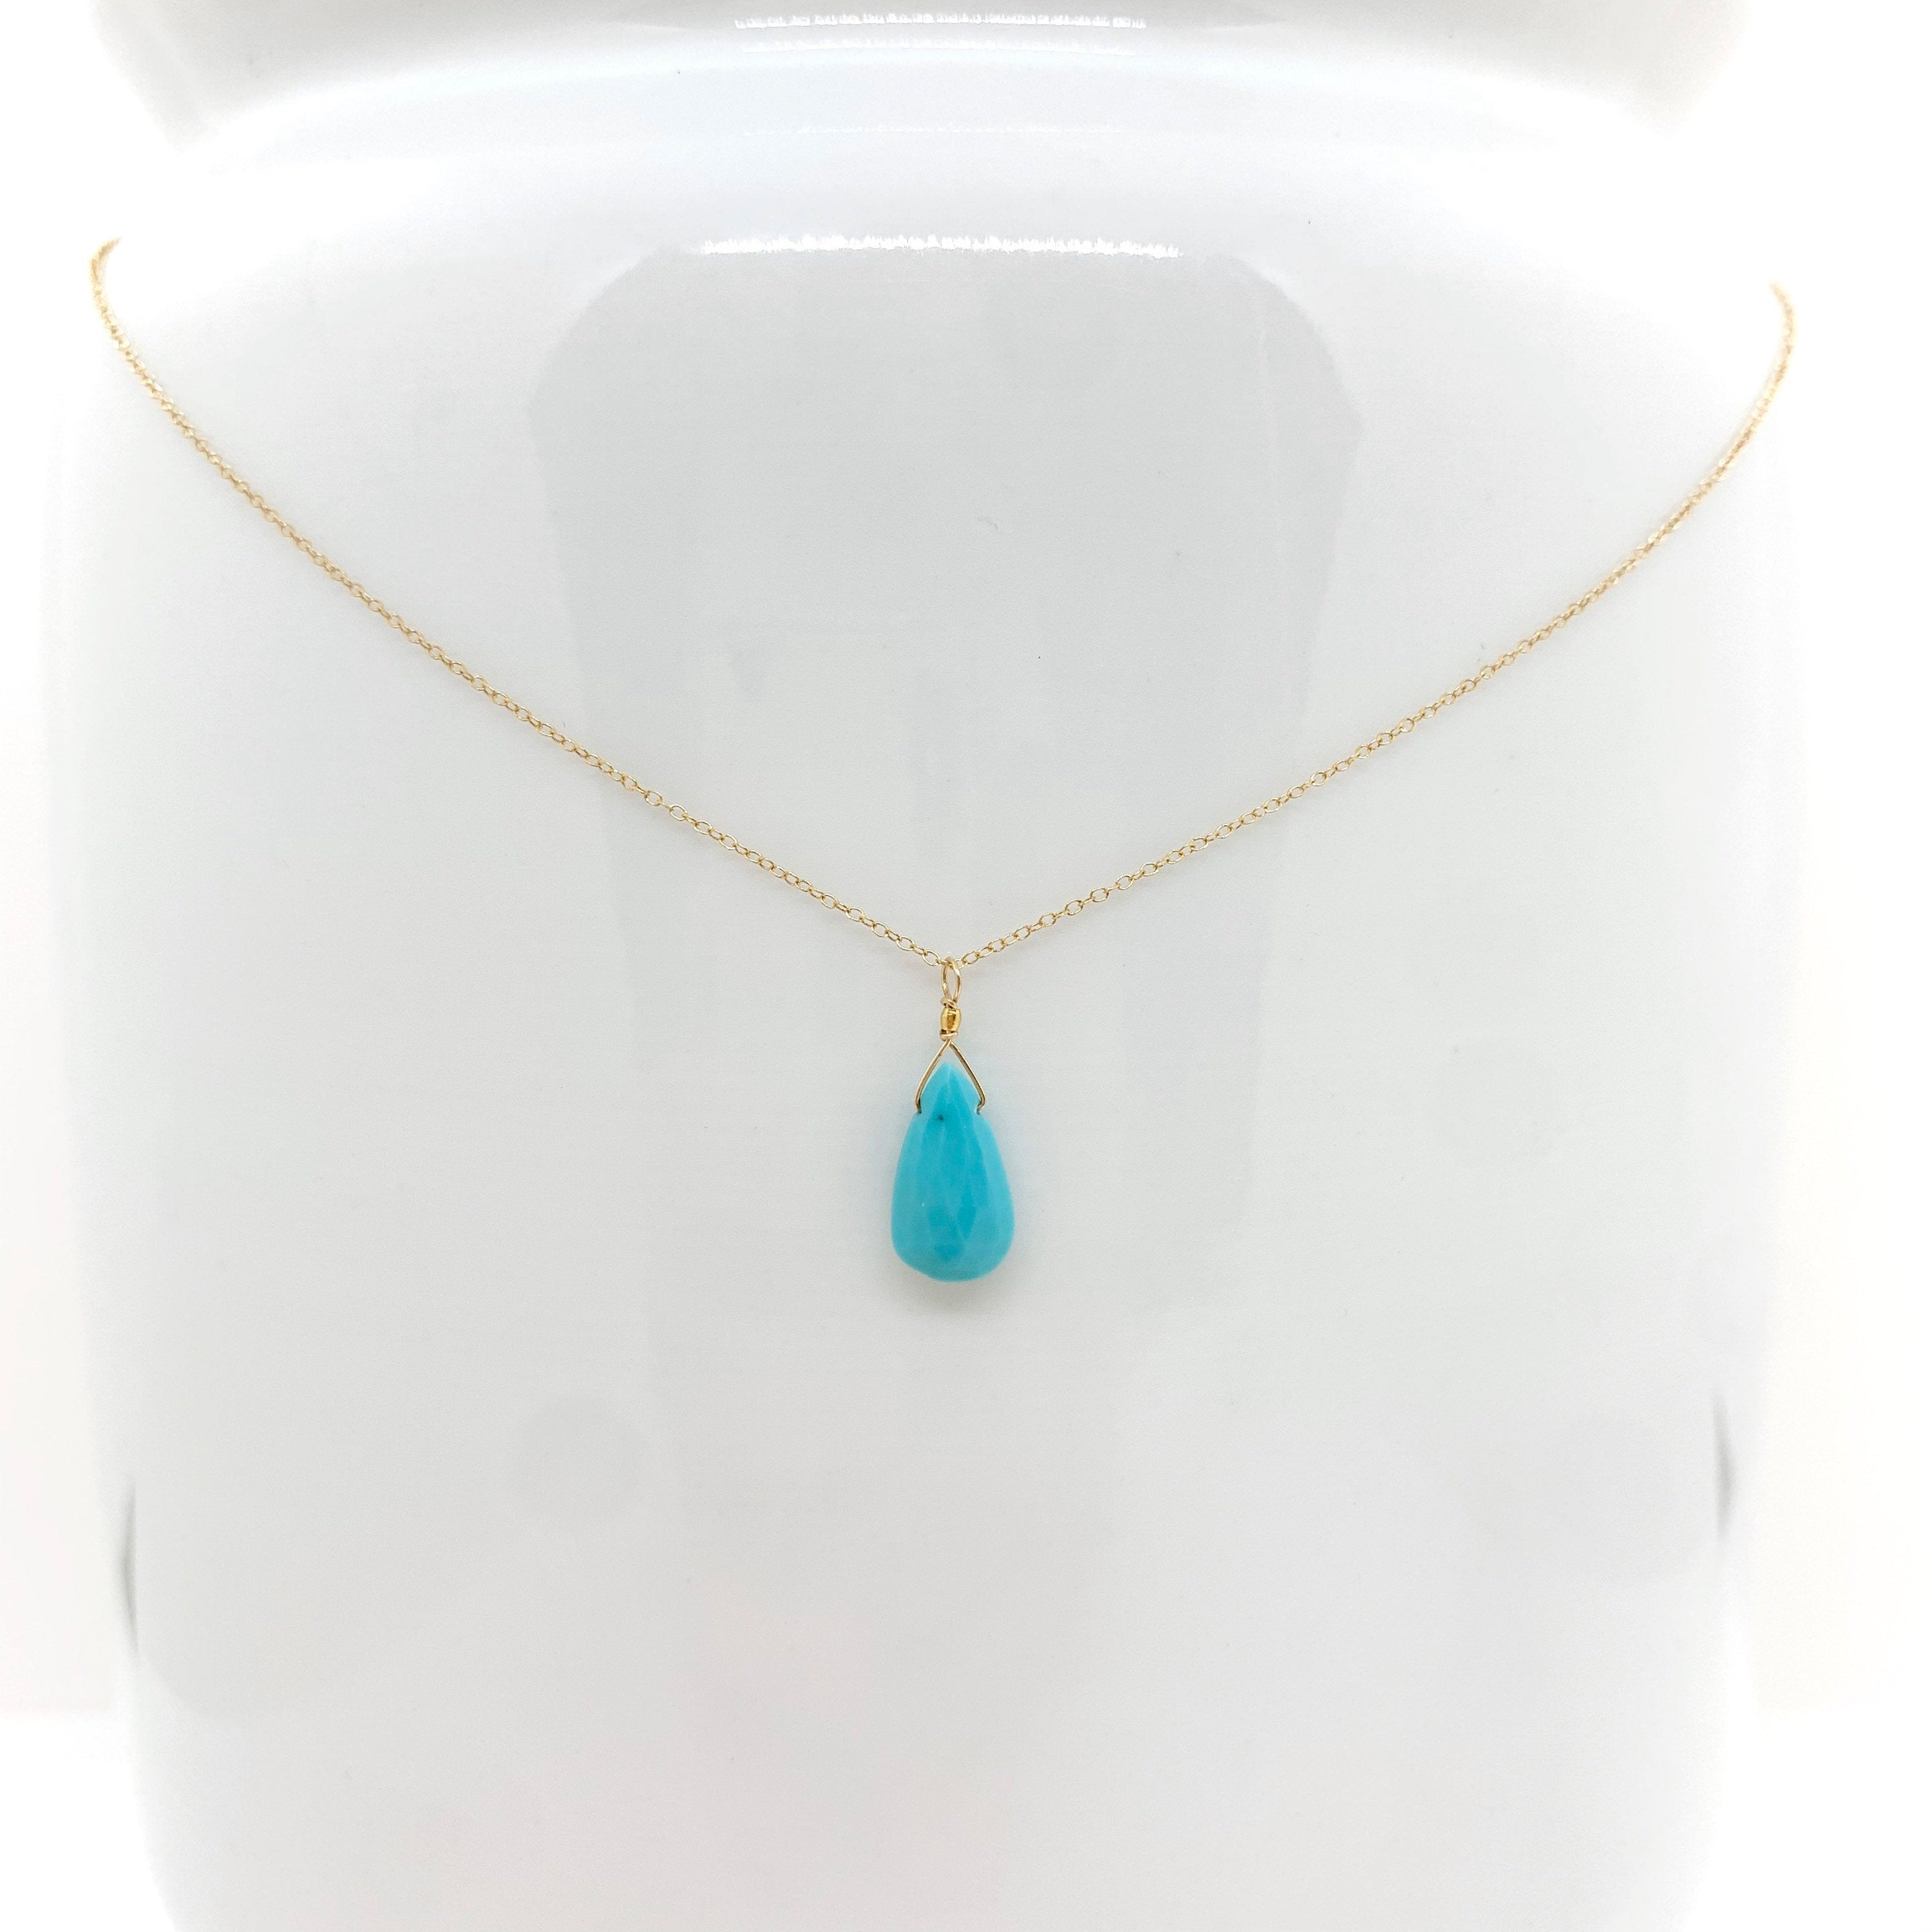 14k Gold Chain Necklace w/ Turquoise Drop & 18k Gold Nugget